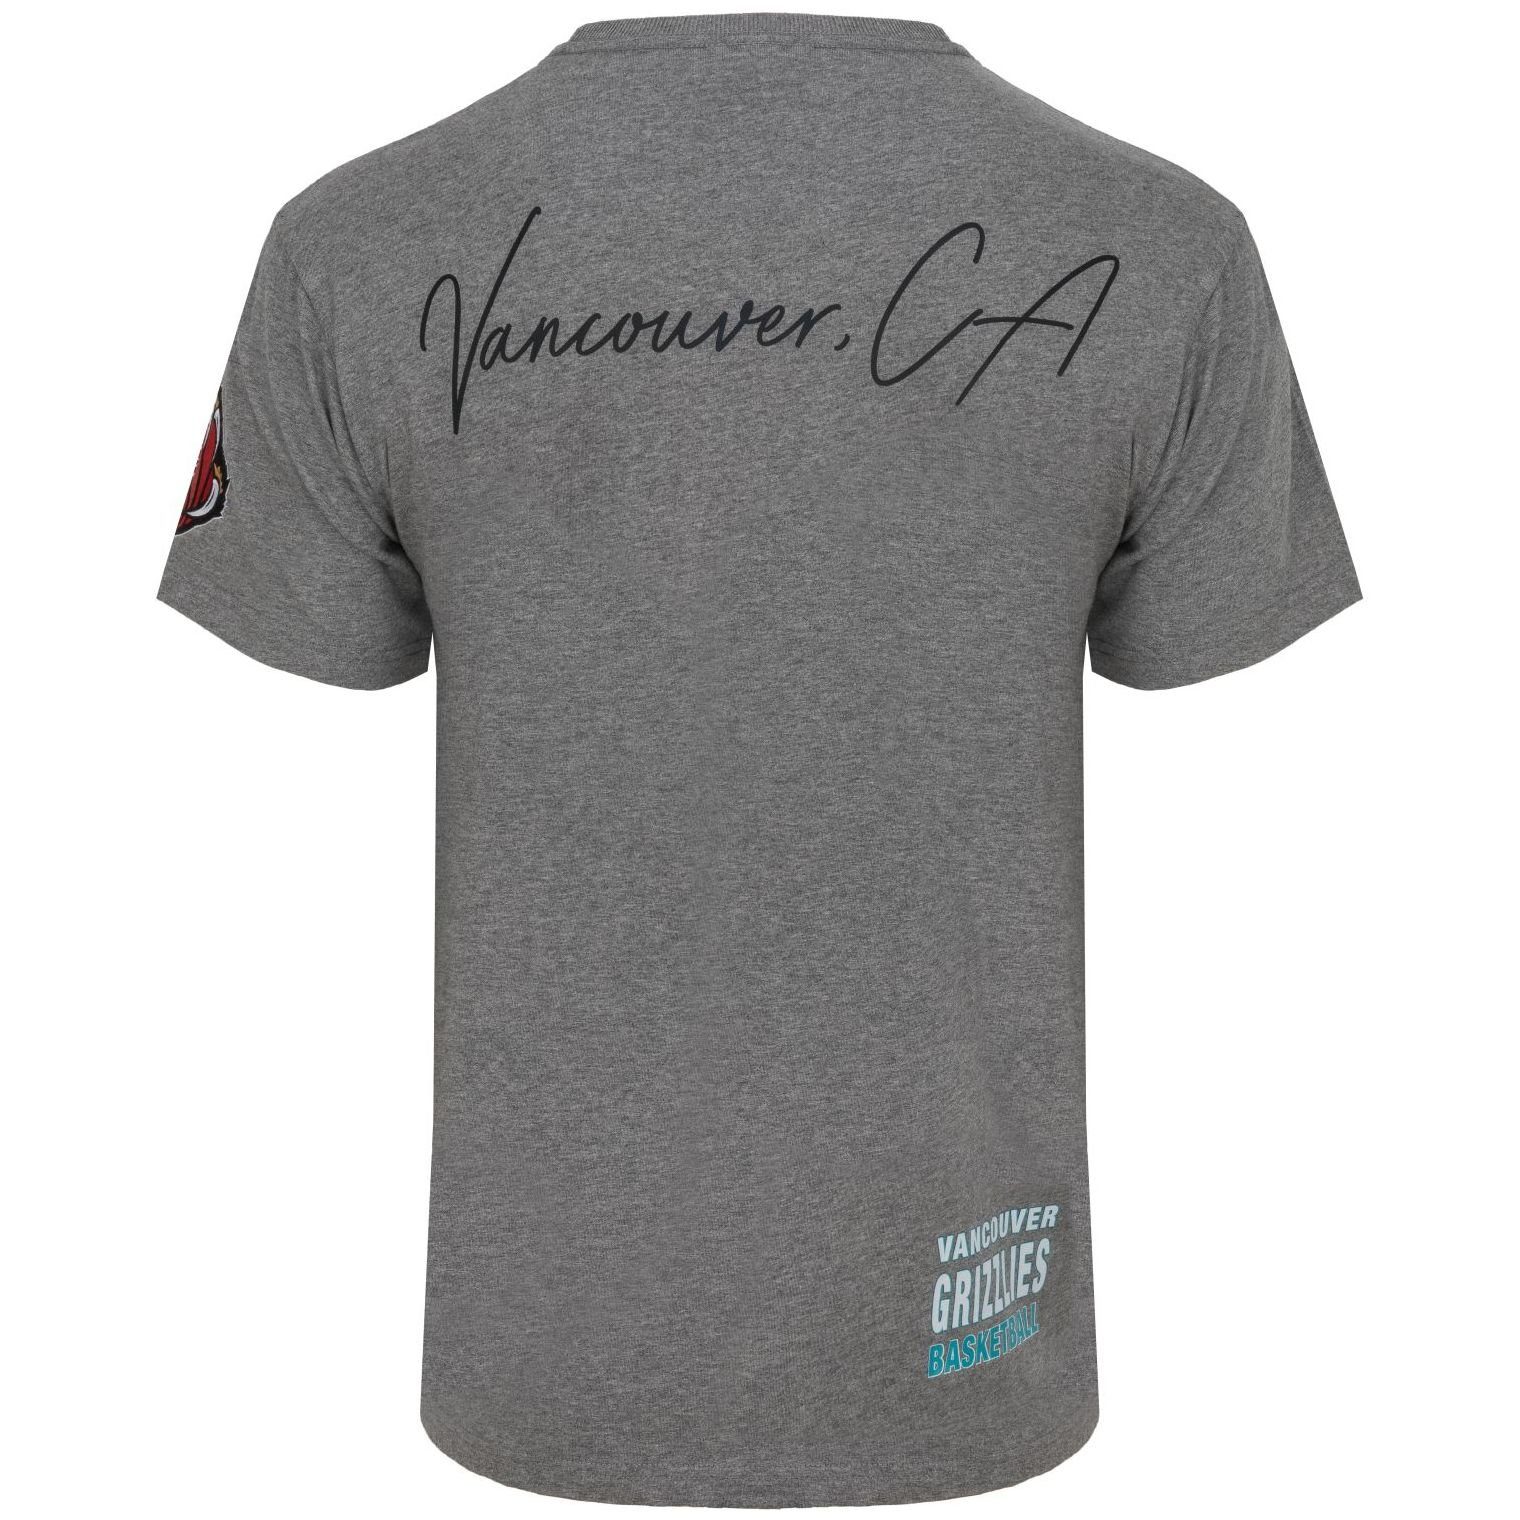 CITY & HOMETOWN Ness Print-Shirt Mitchell Grizzlies Vancouver